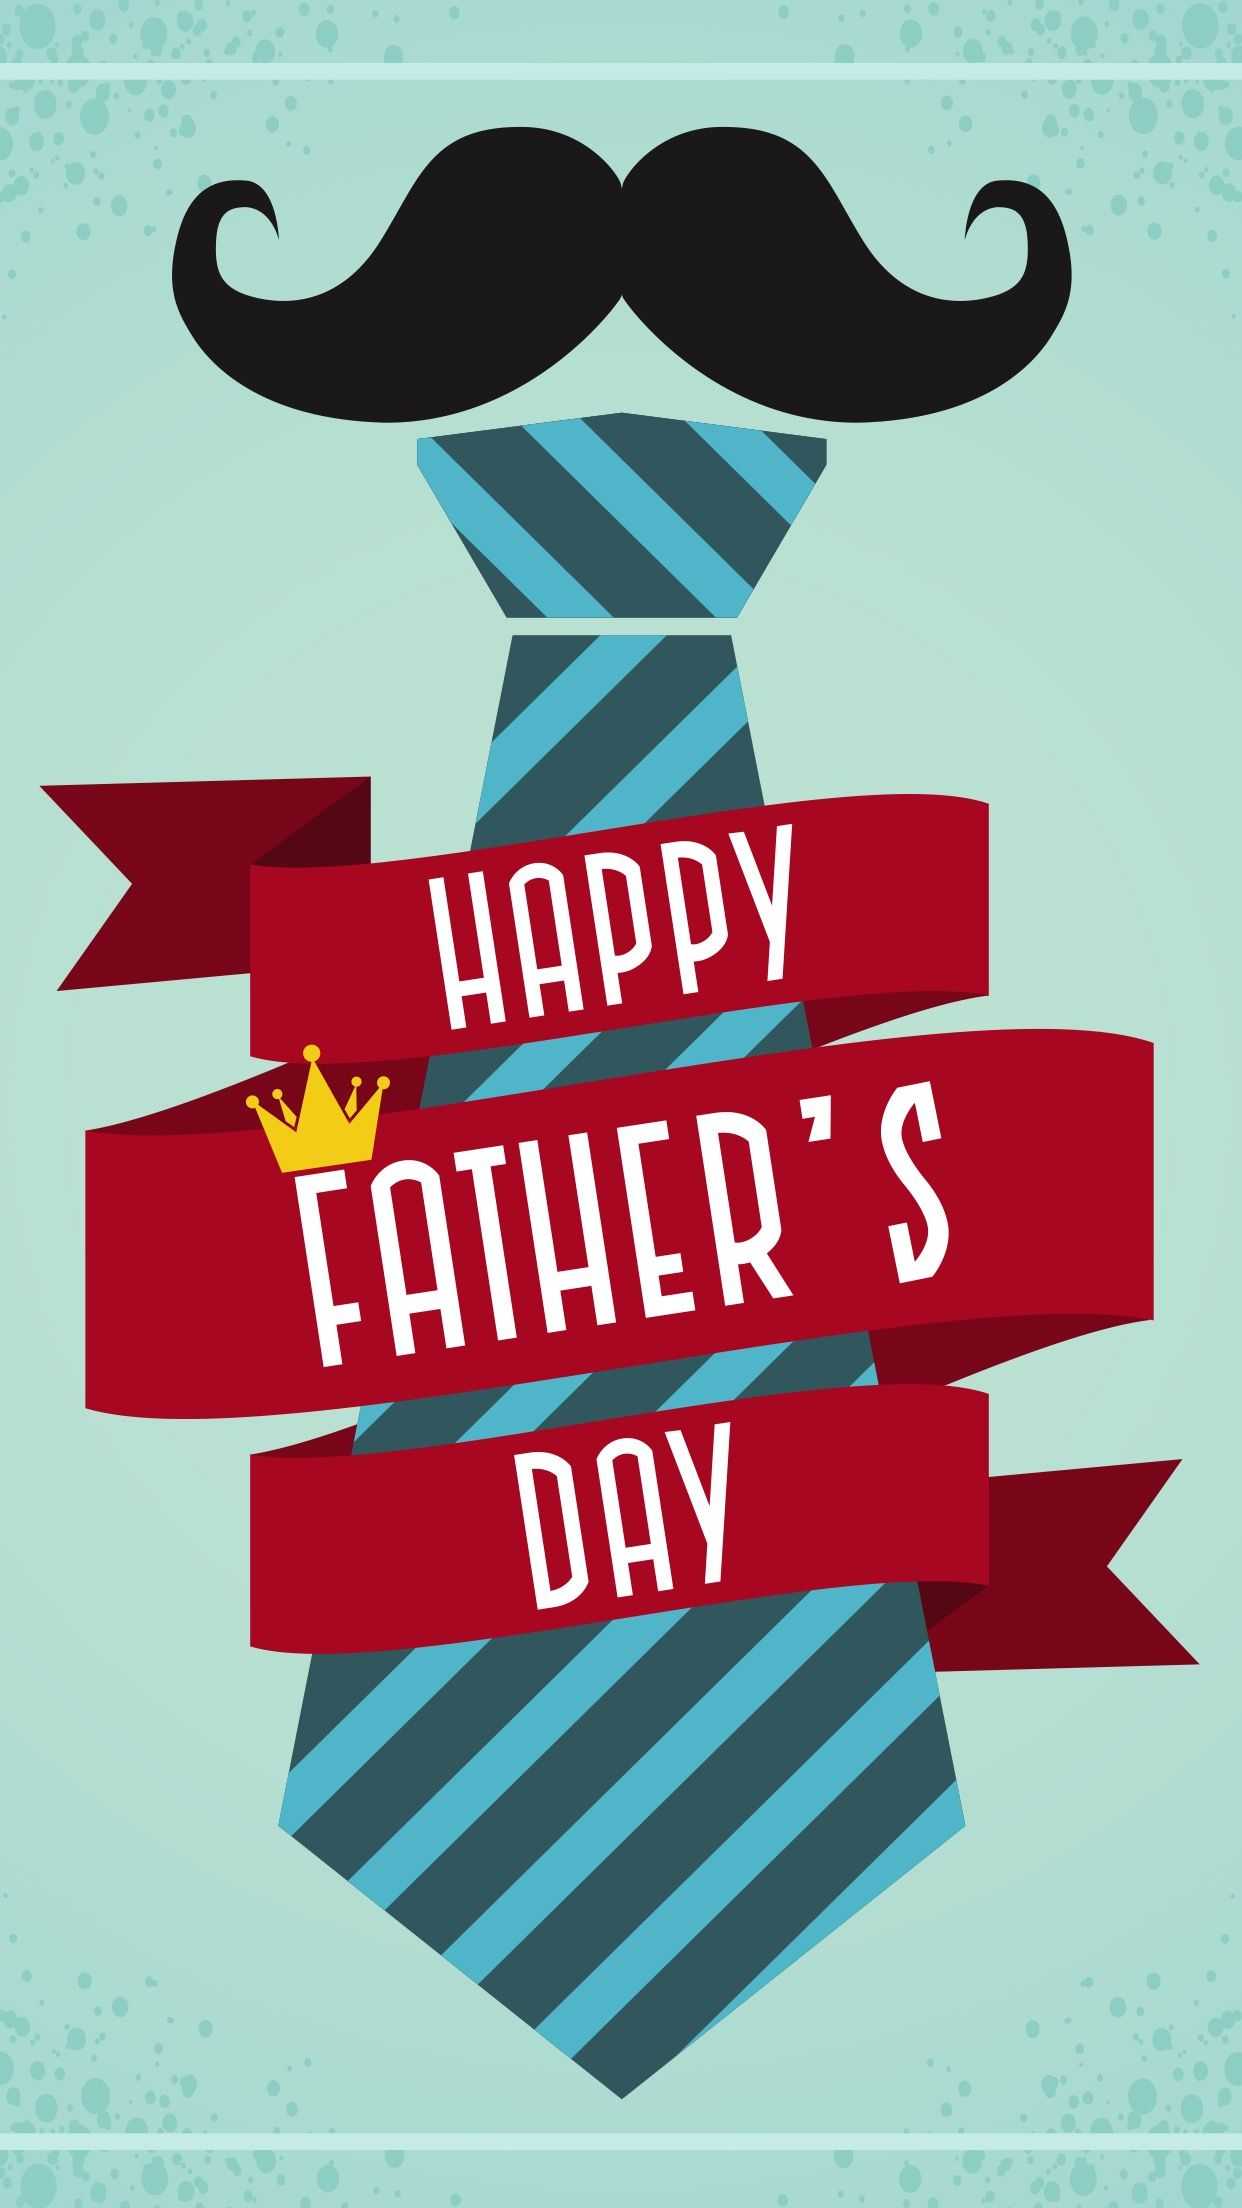 Happy Fathers Day Wallpaper - IXpaper